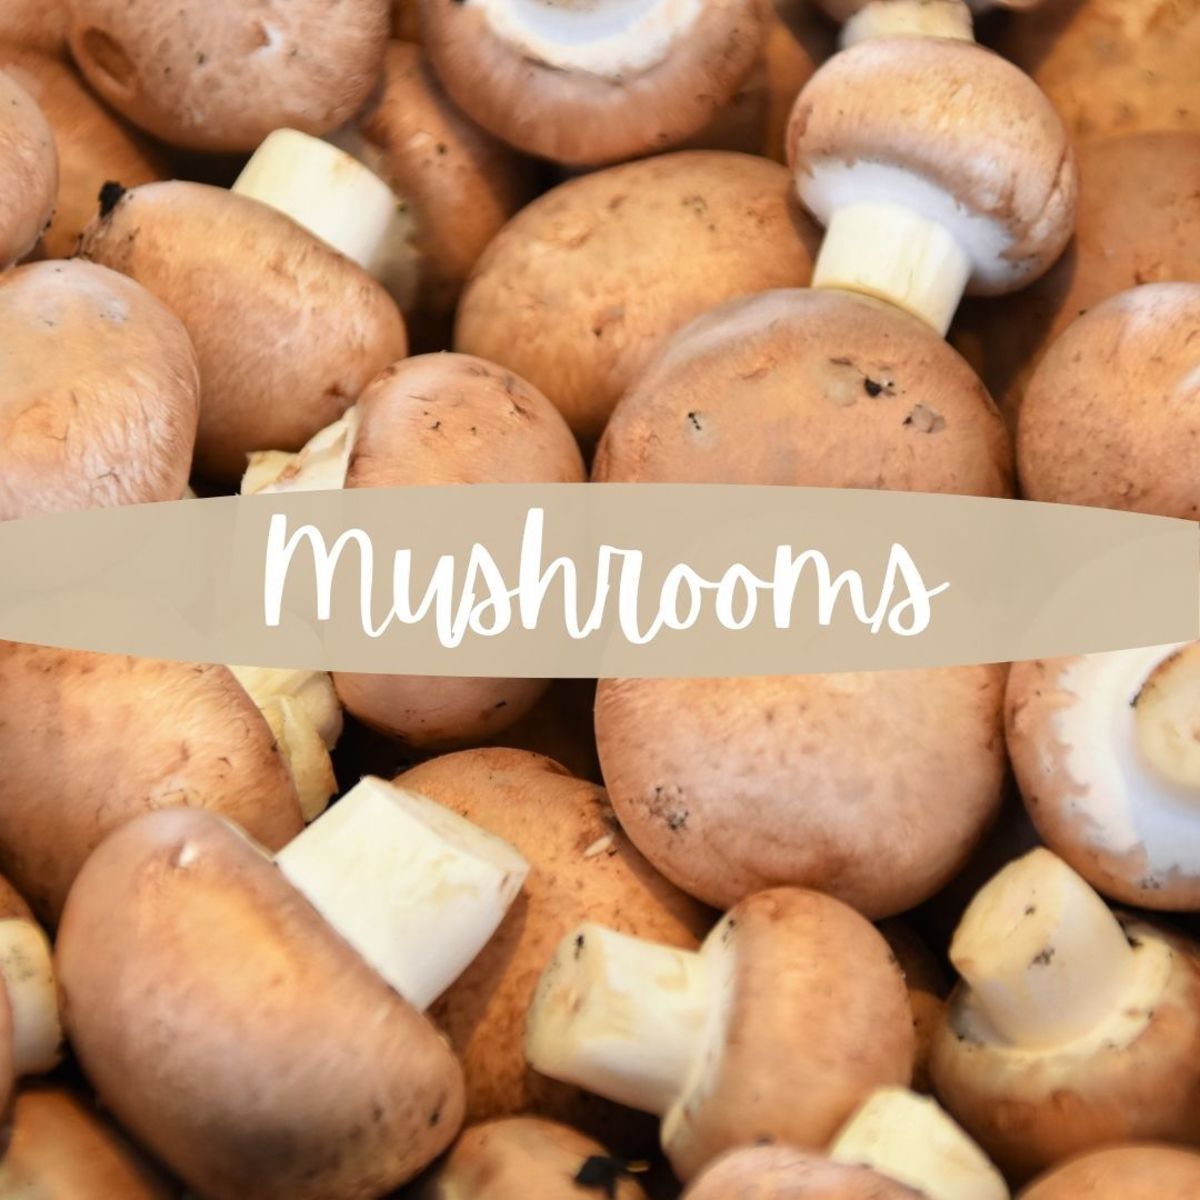 Mushrooms are an excellent source of dietary iron and iron. Stir-fry them or toss them into a soup.